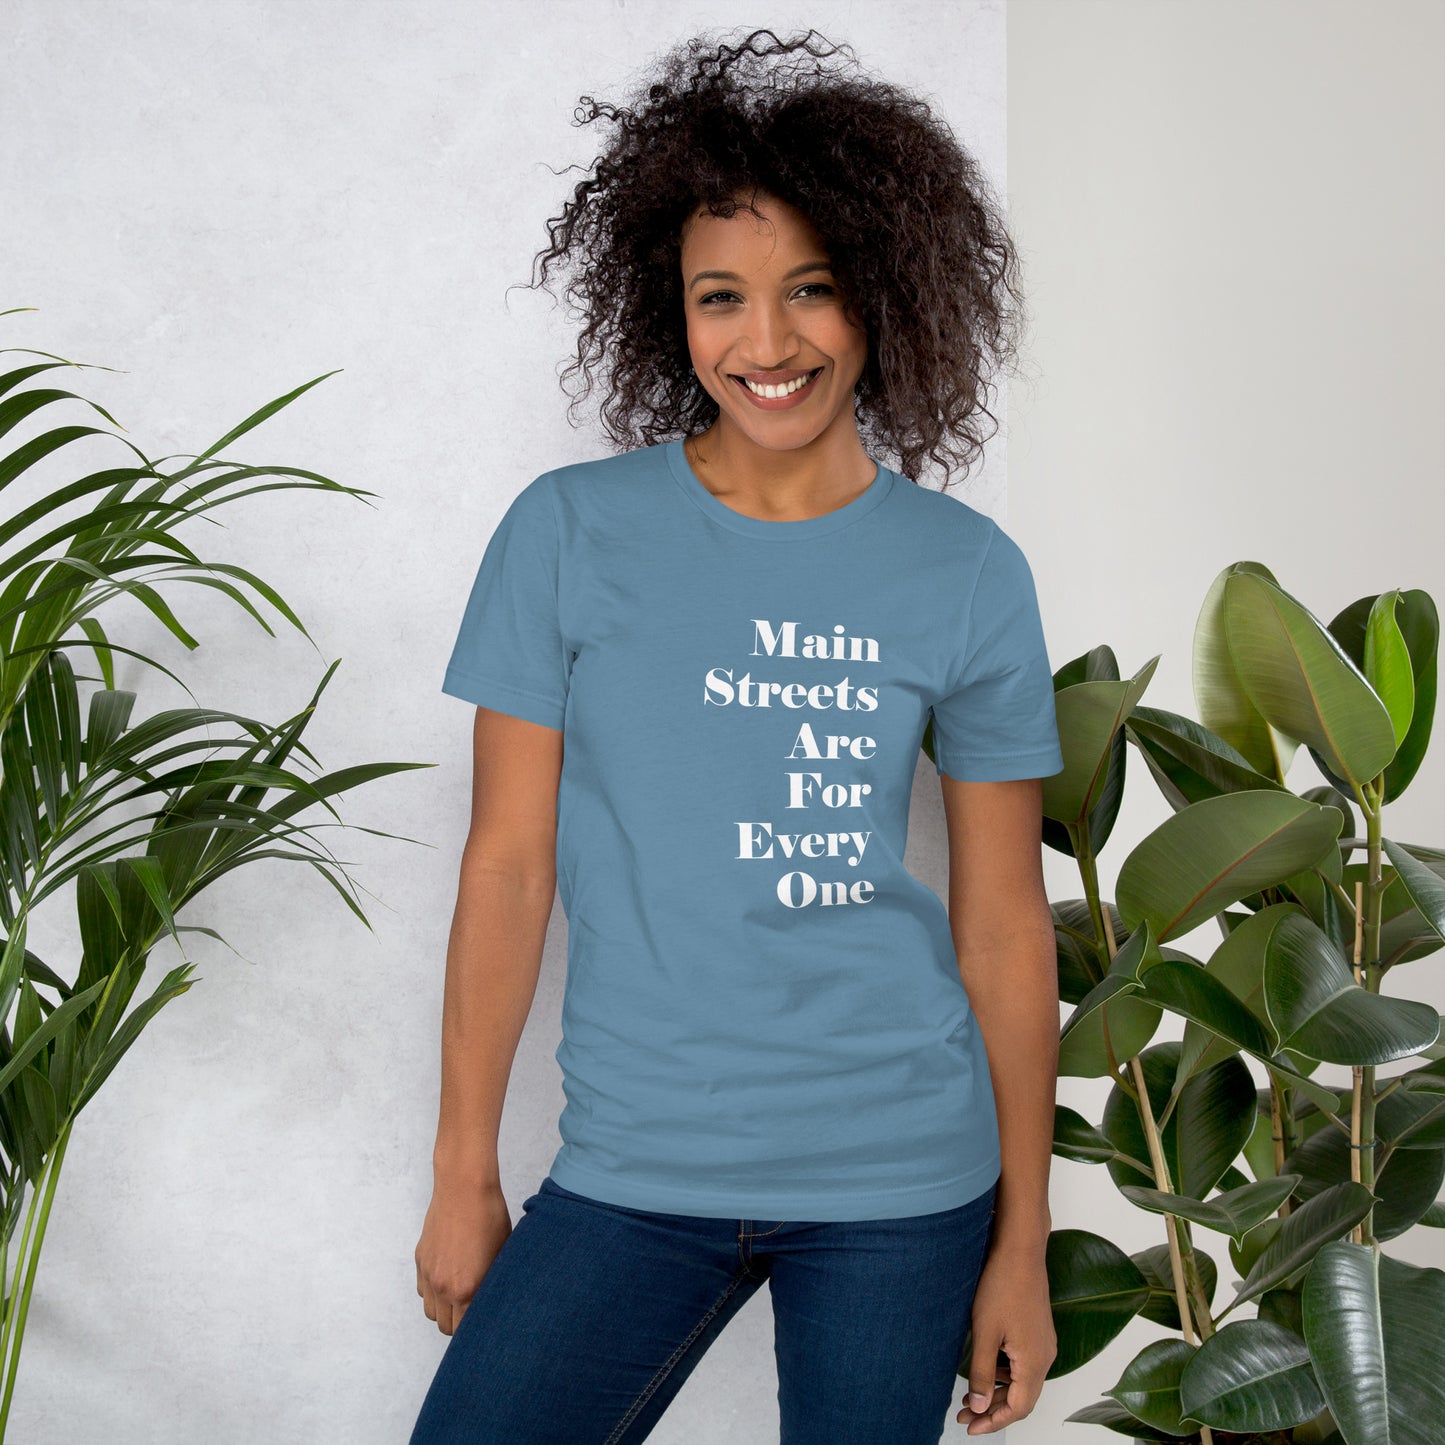 Main Streets Are For Everyone (White) Unisex T-shirt